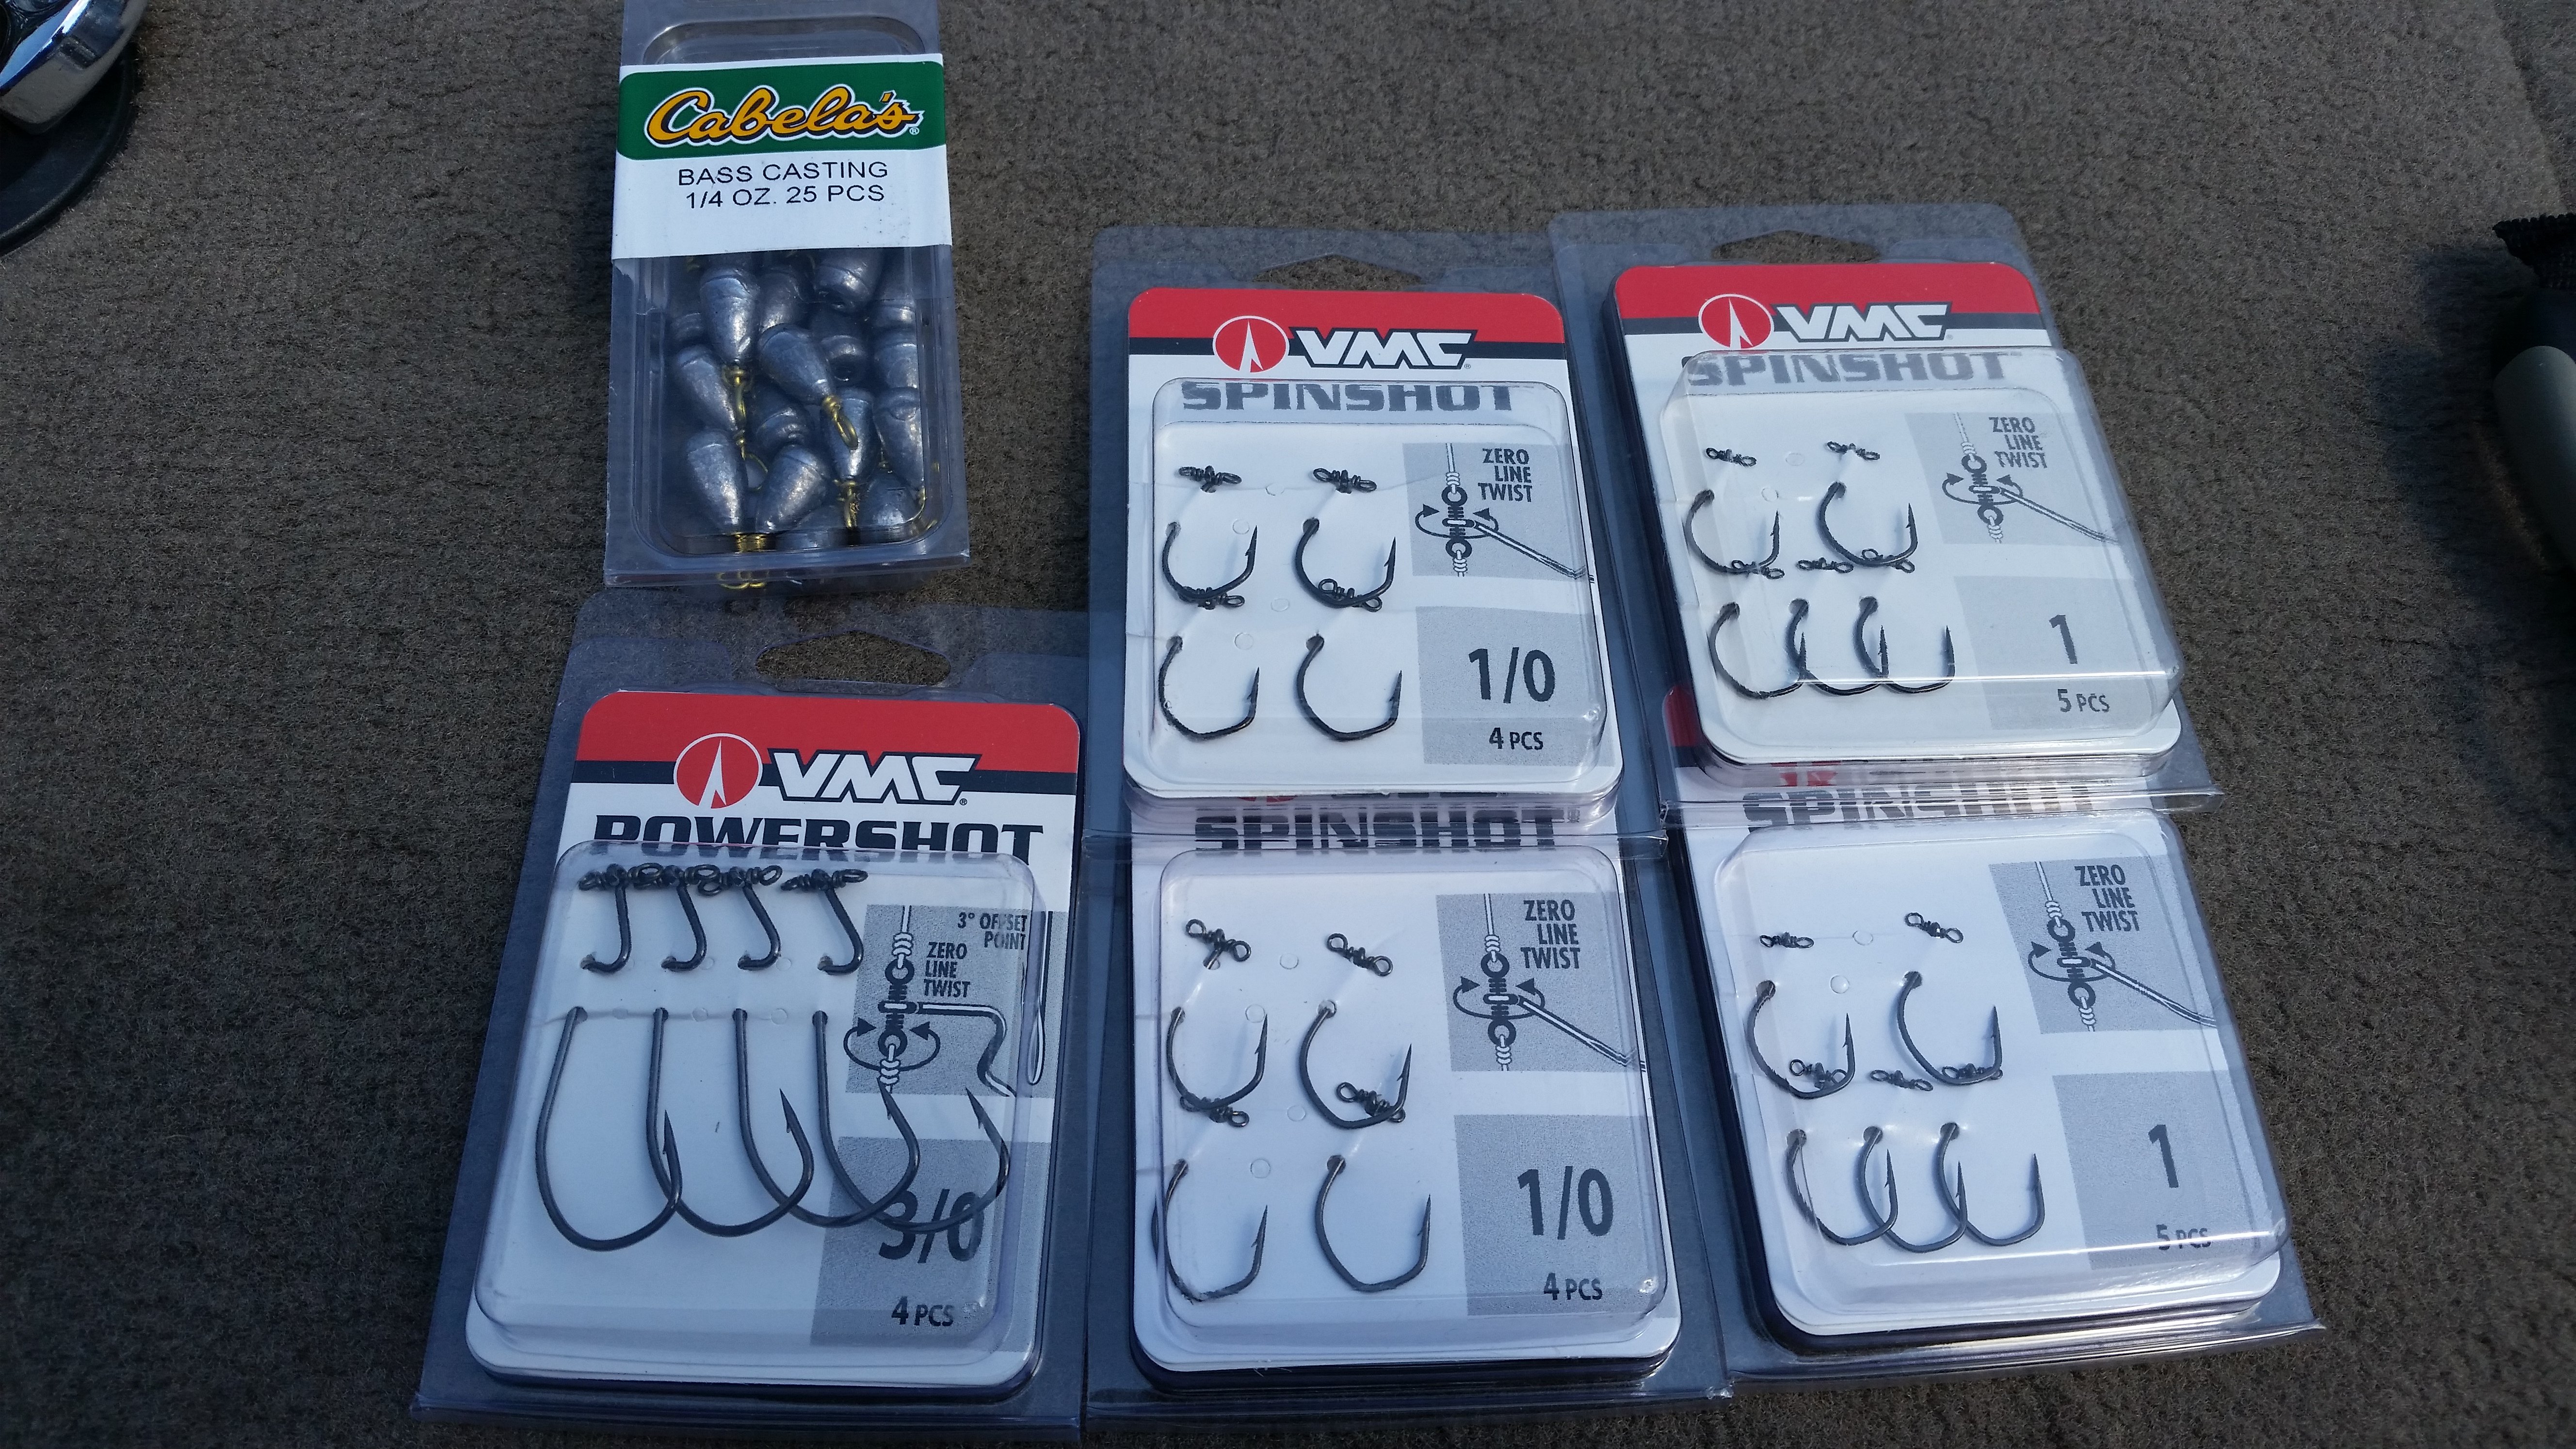 Drop Shot Rigs For Walleye and Smallmouth Bass